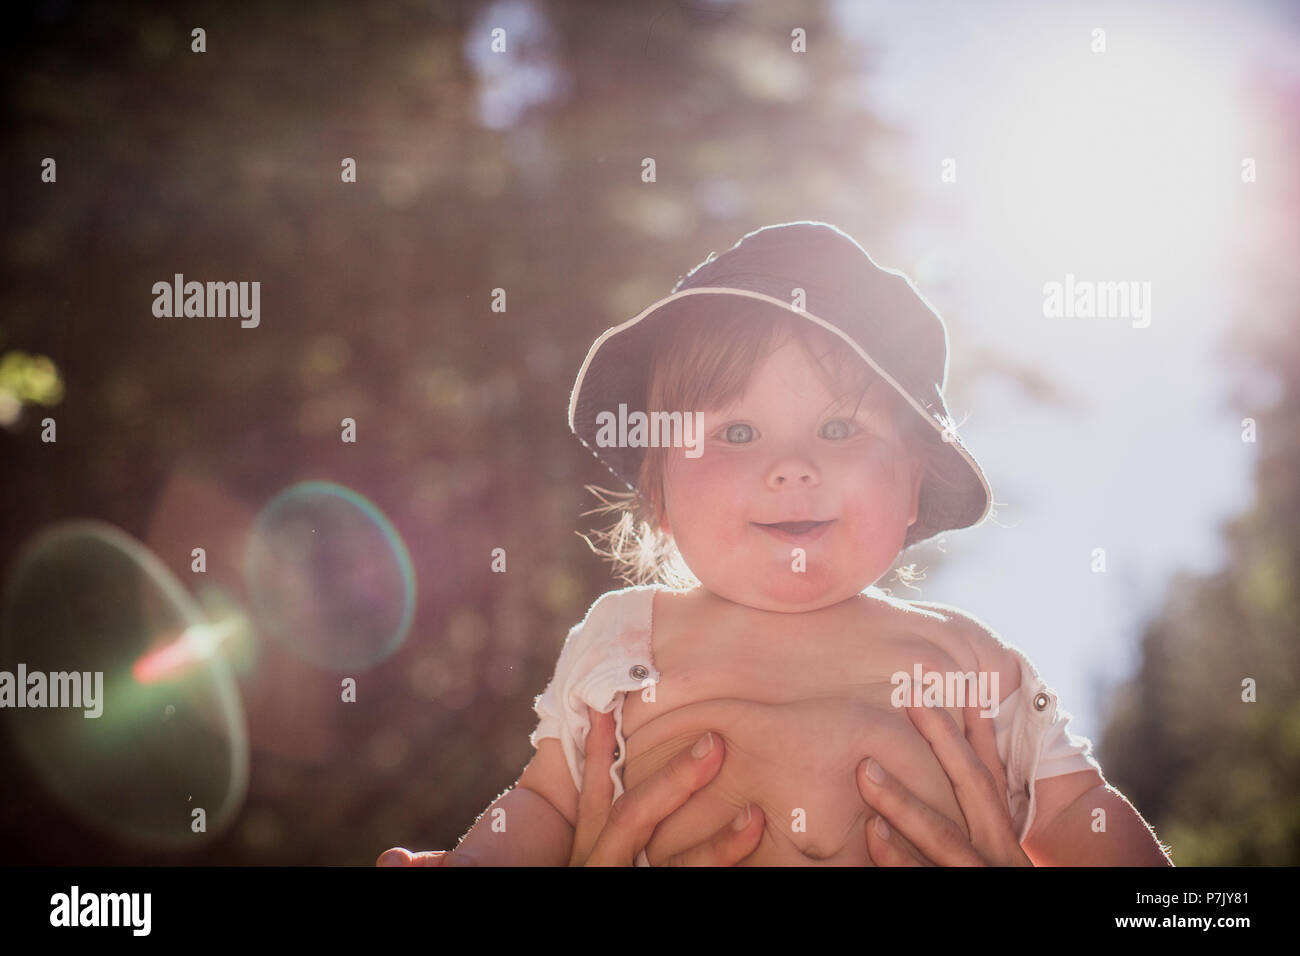 held up toddler, smiling, looking into camera, backlight, Stock Photo